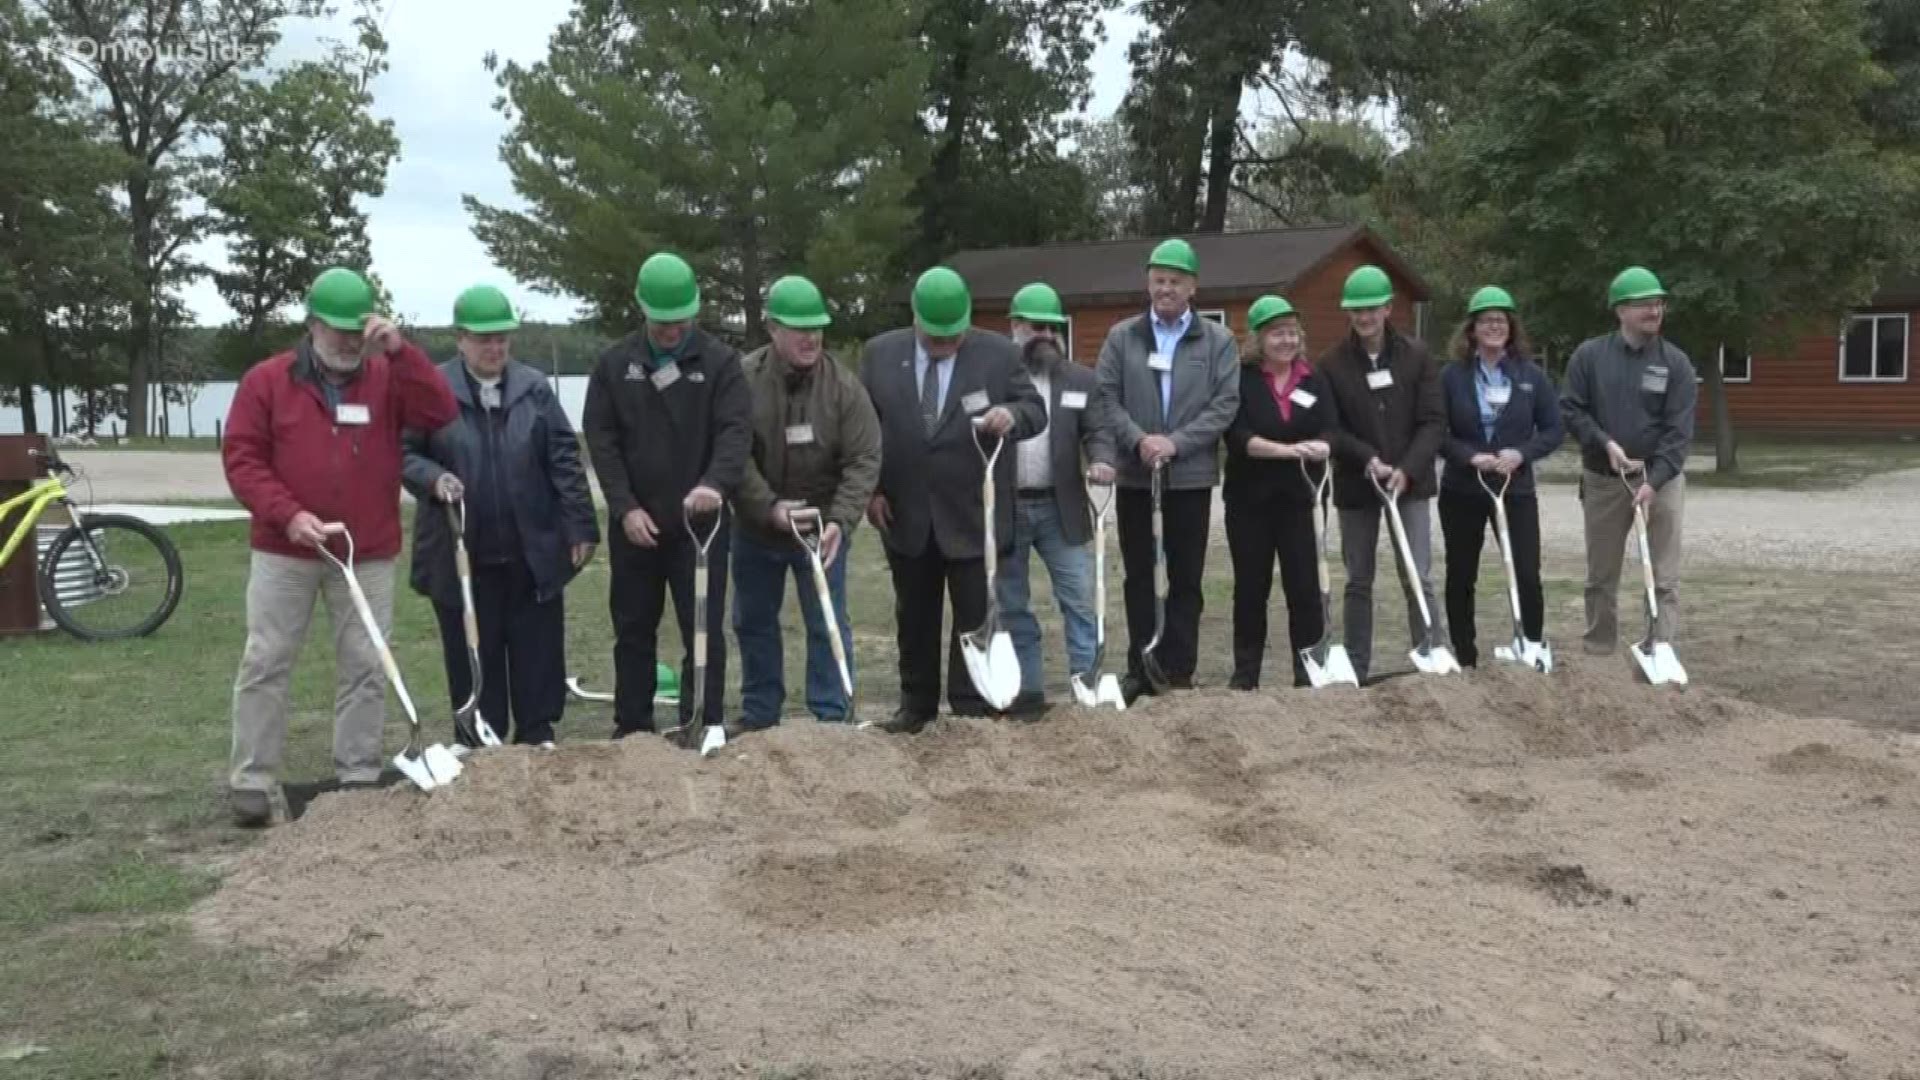 A groundbreaking ceremony was held for the development of Michigan's Dragon trail.